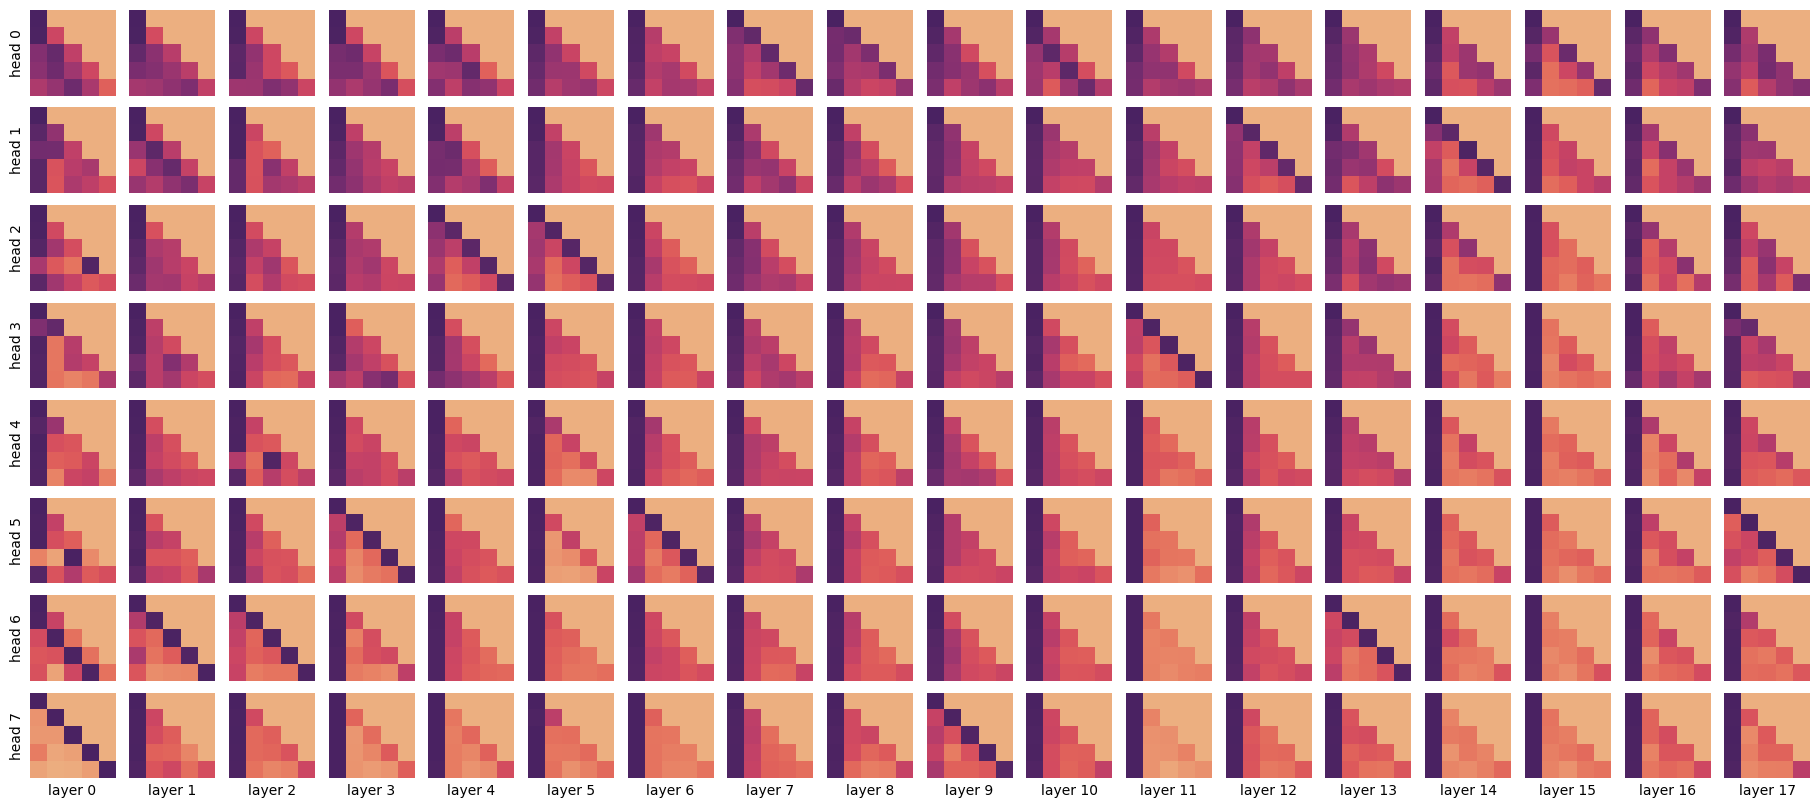 A grid of 5 by 5 pixel images, showing lower-left triangles filled with various patterns. Some are dense (all pixels dark), some are sparse, usually with either a diagonal dark stripe or one on the far left.